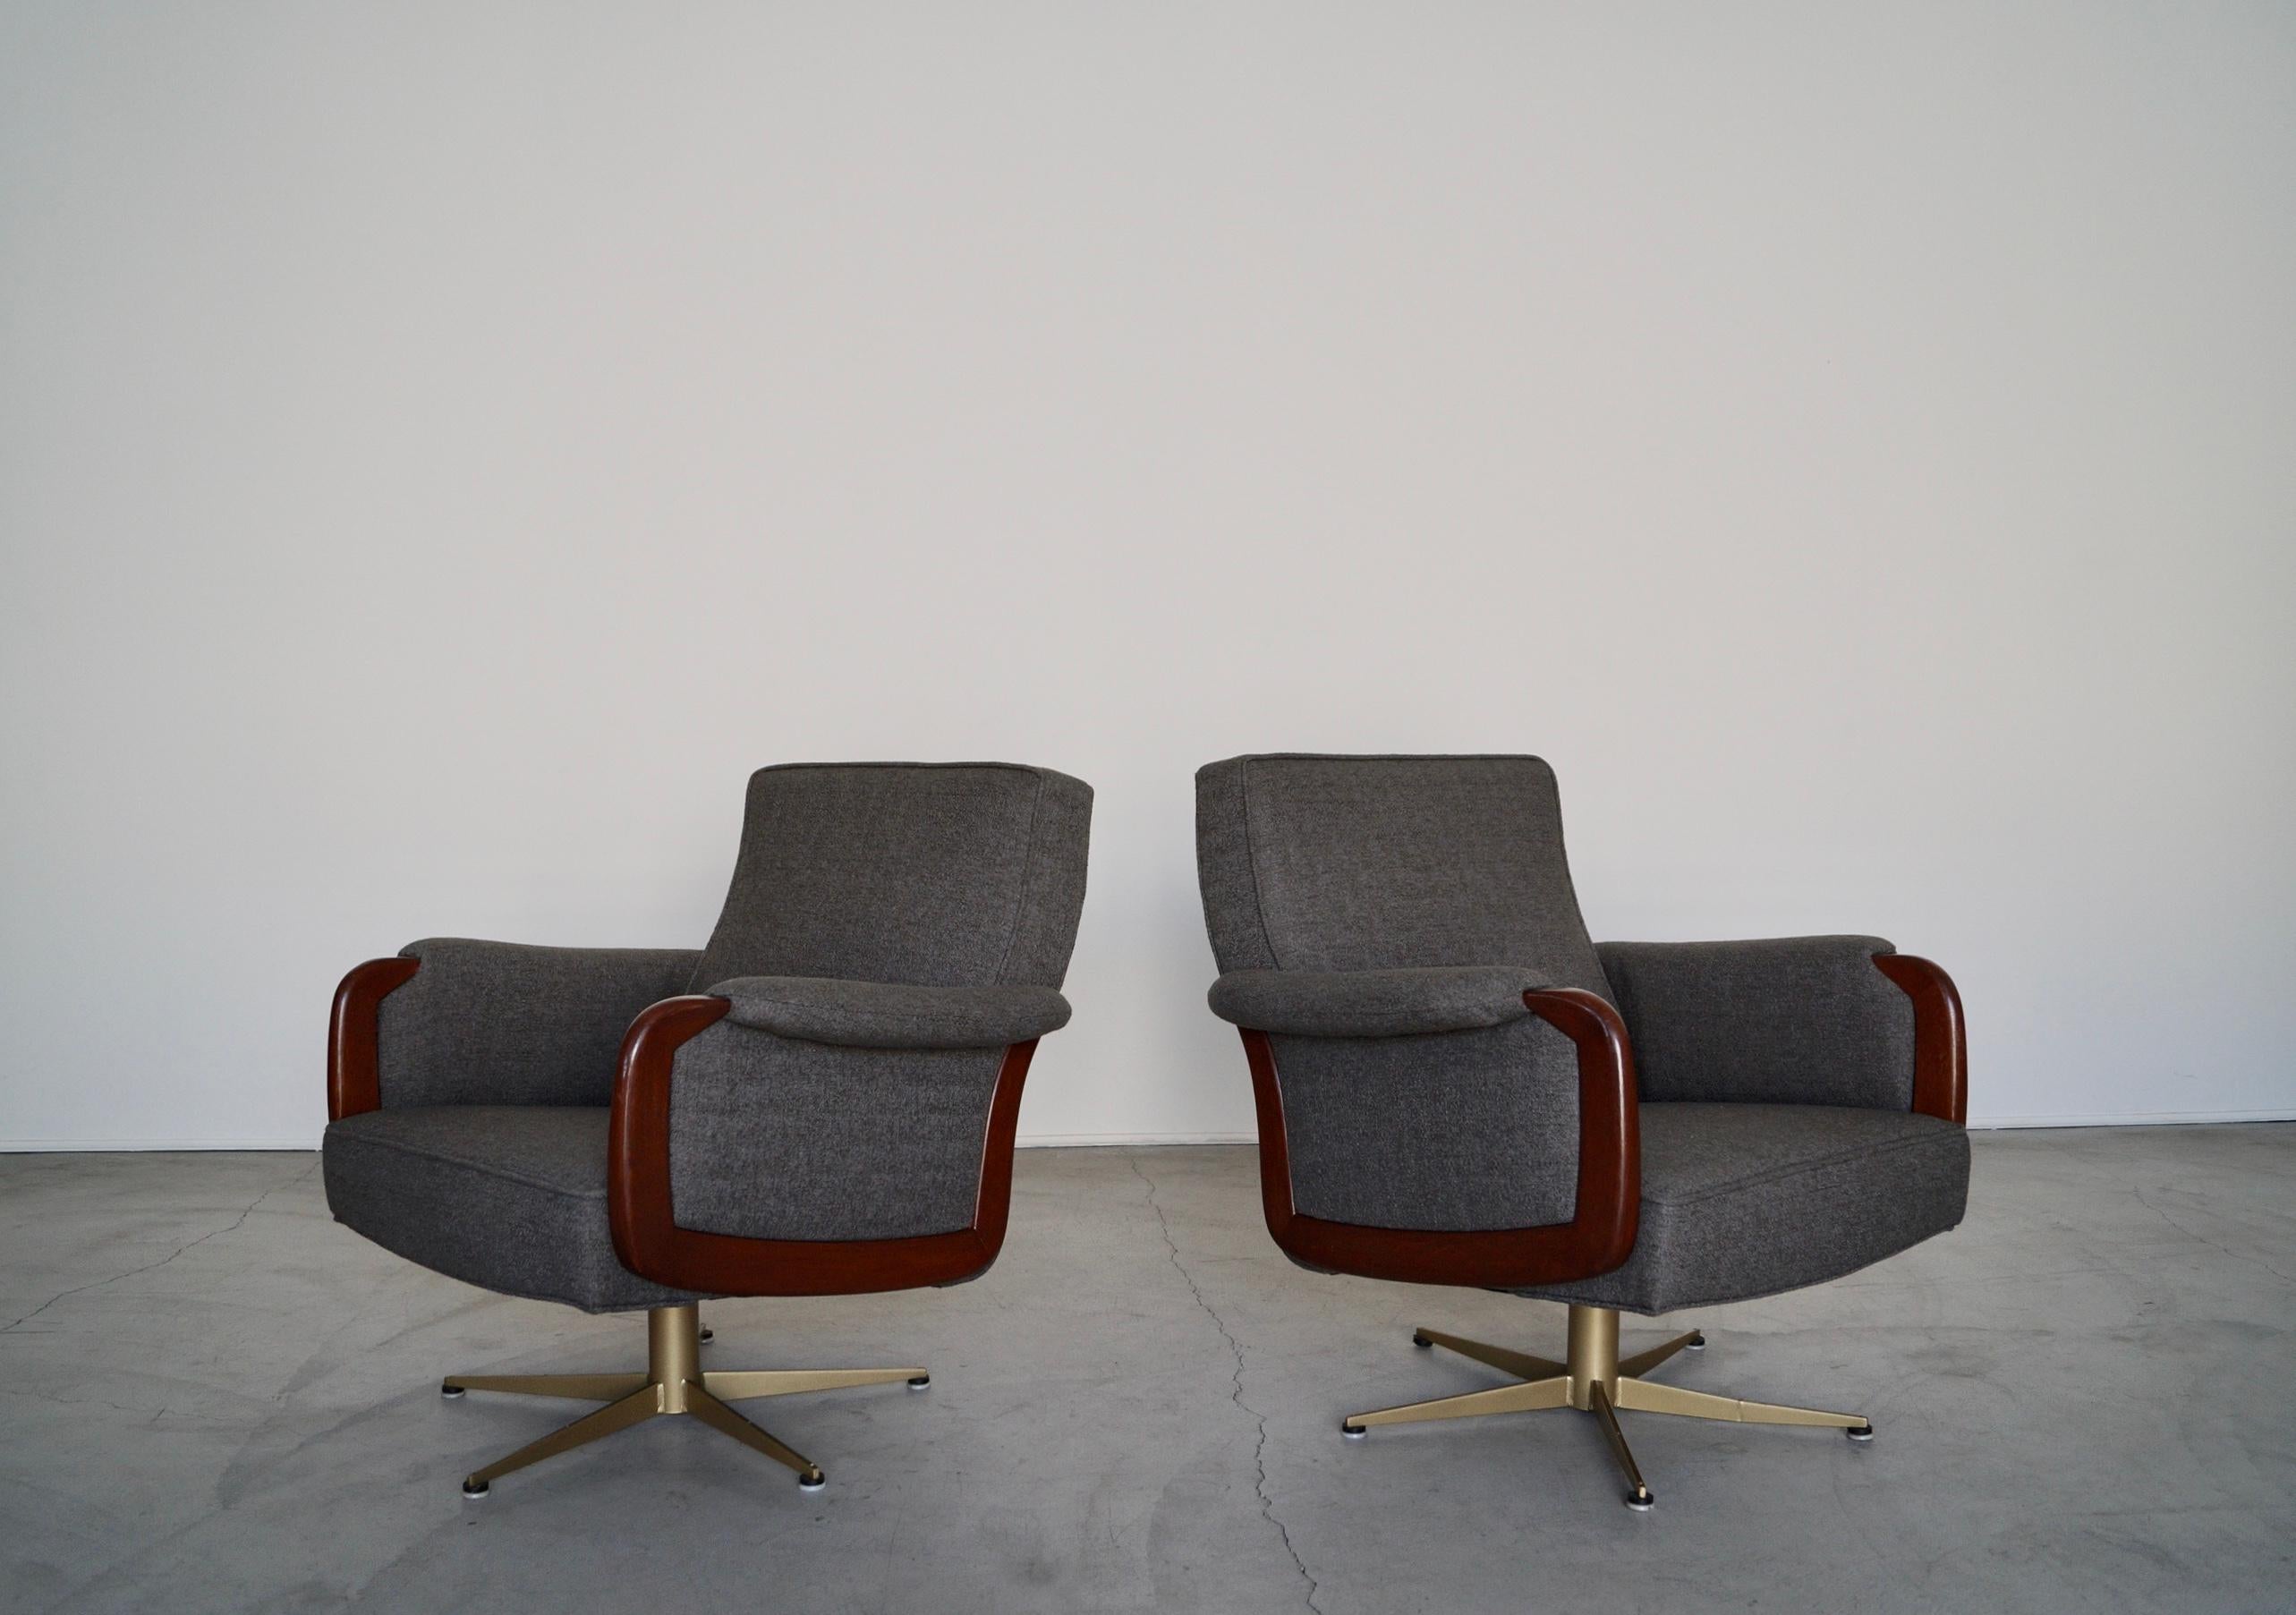 1970's Mid-Century Modern Swivel Lounge Chairs - a Pair In Excellent Condition For Sale In Burbank, CA